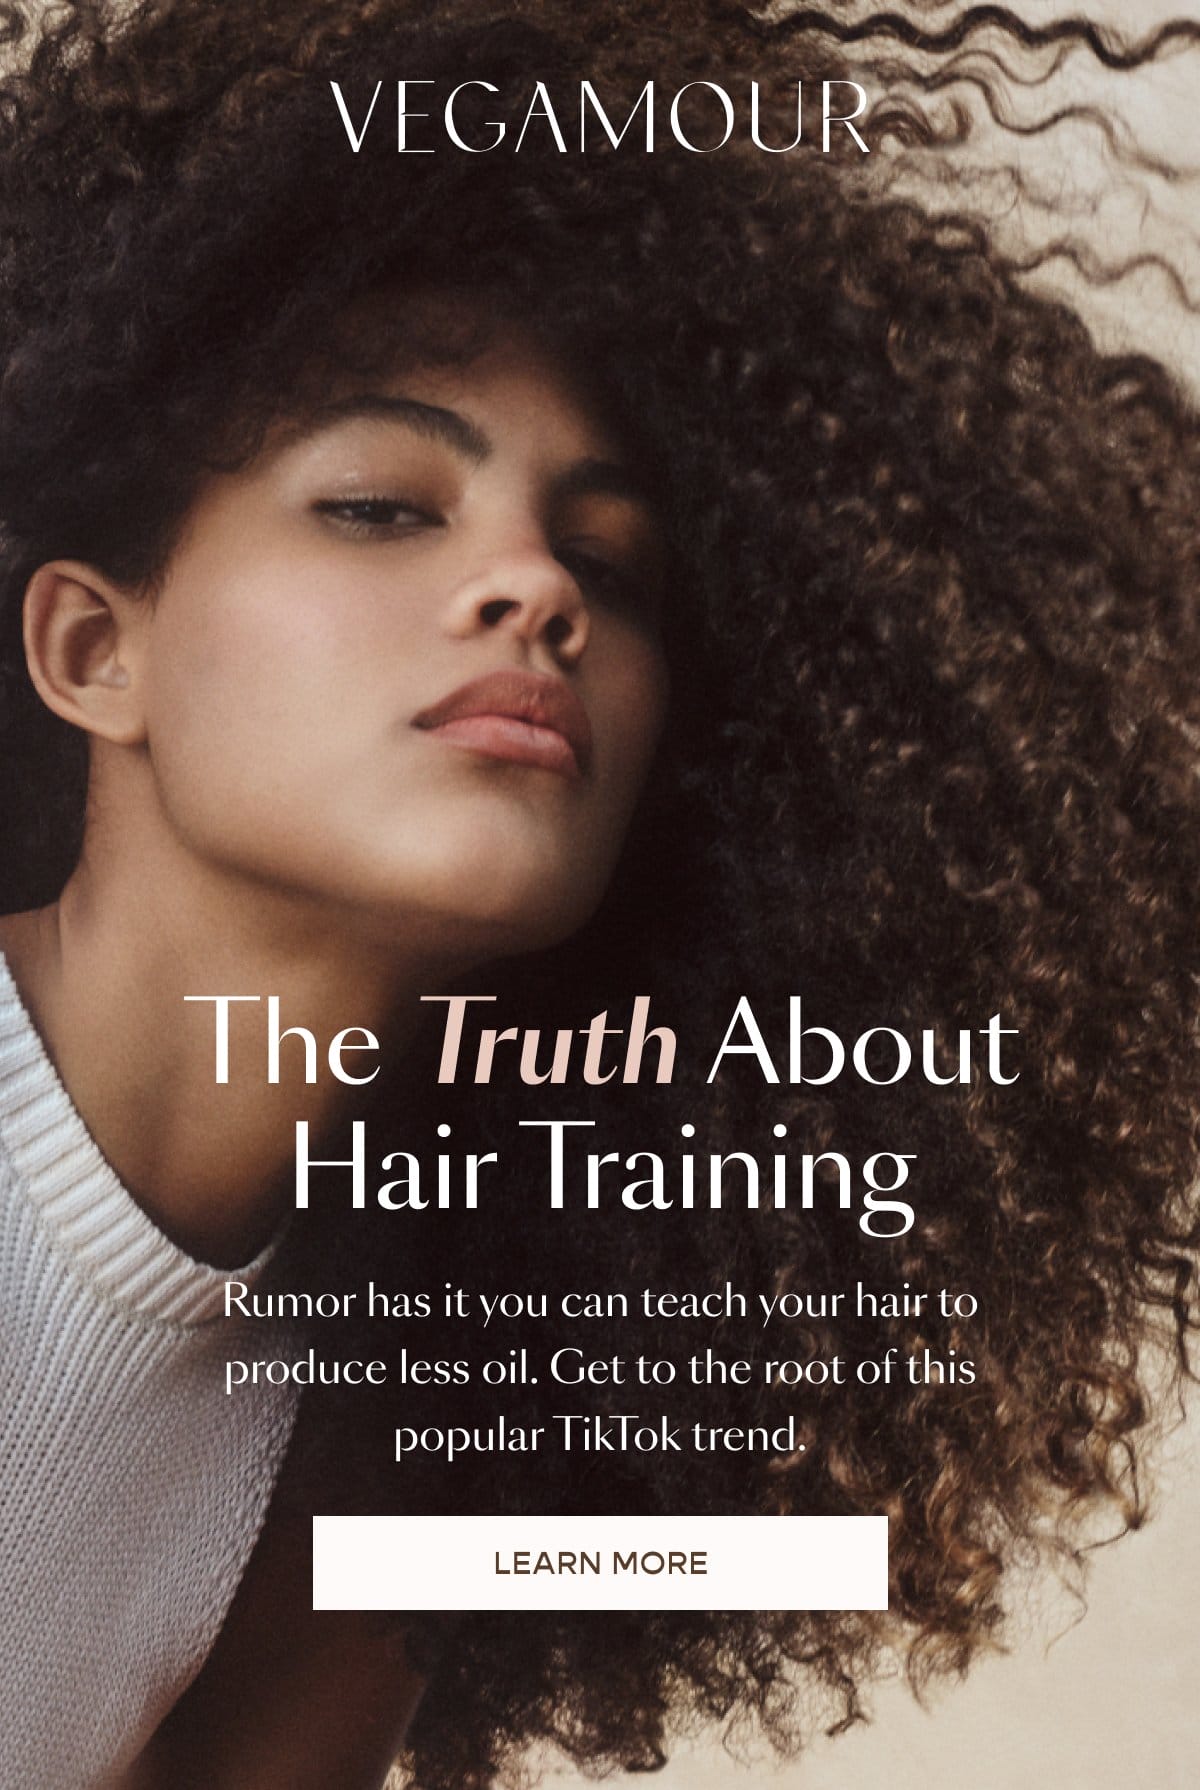 Vegamour. The Truth About Hair Training.